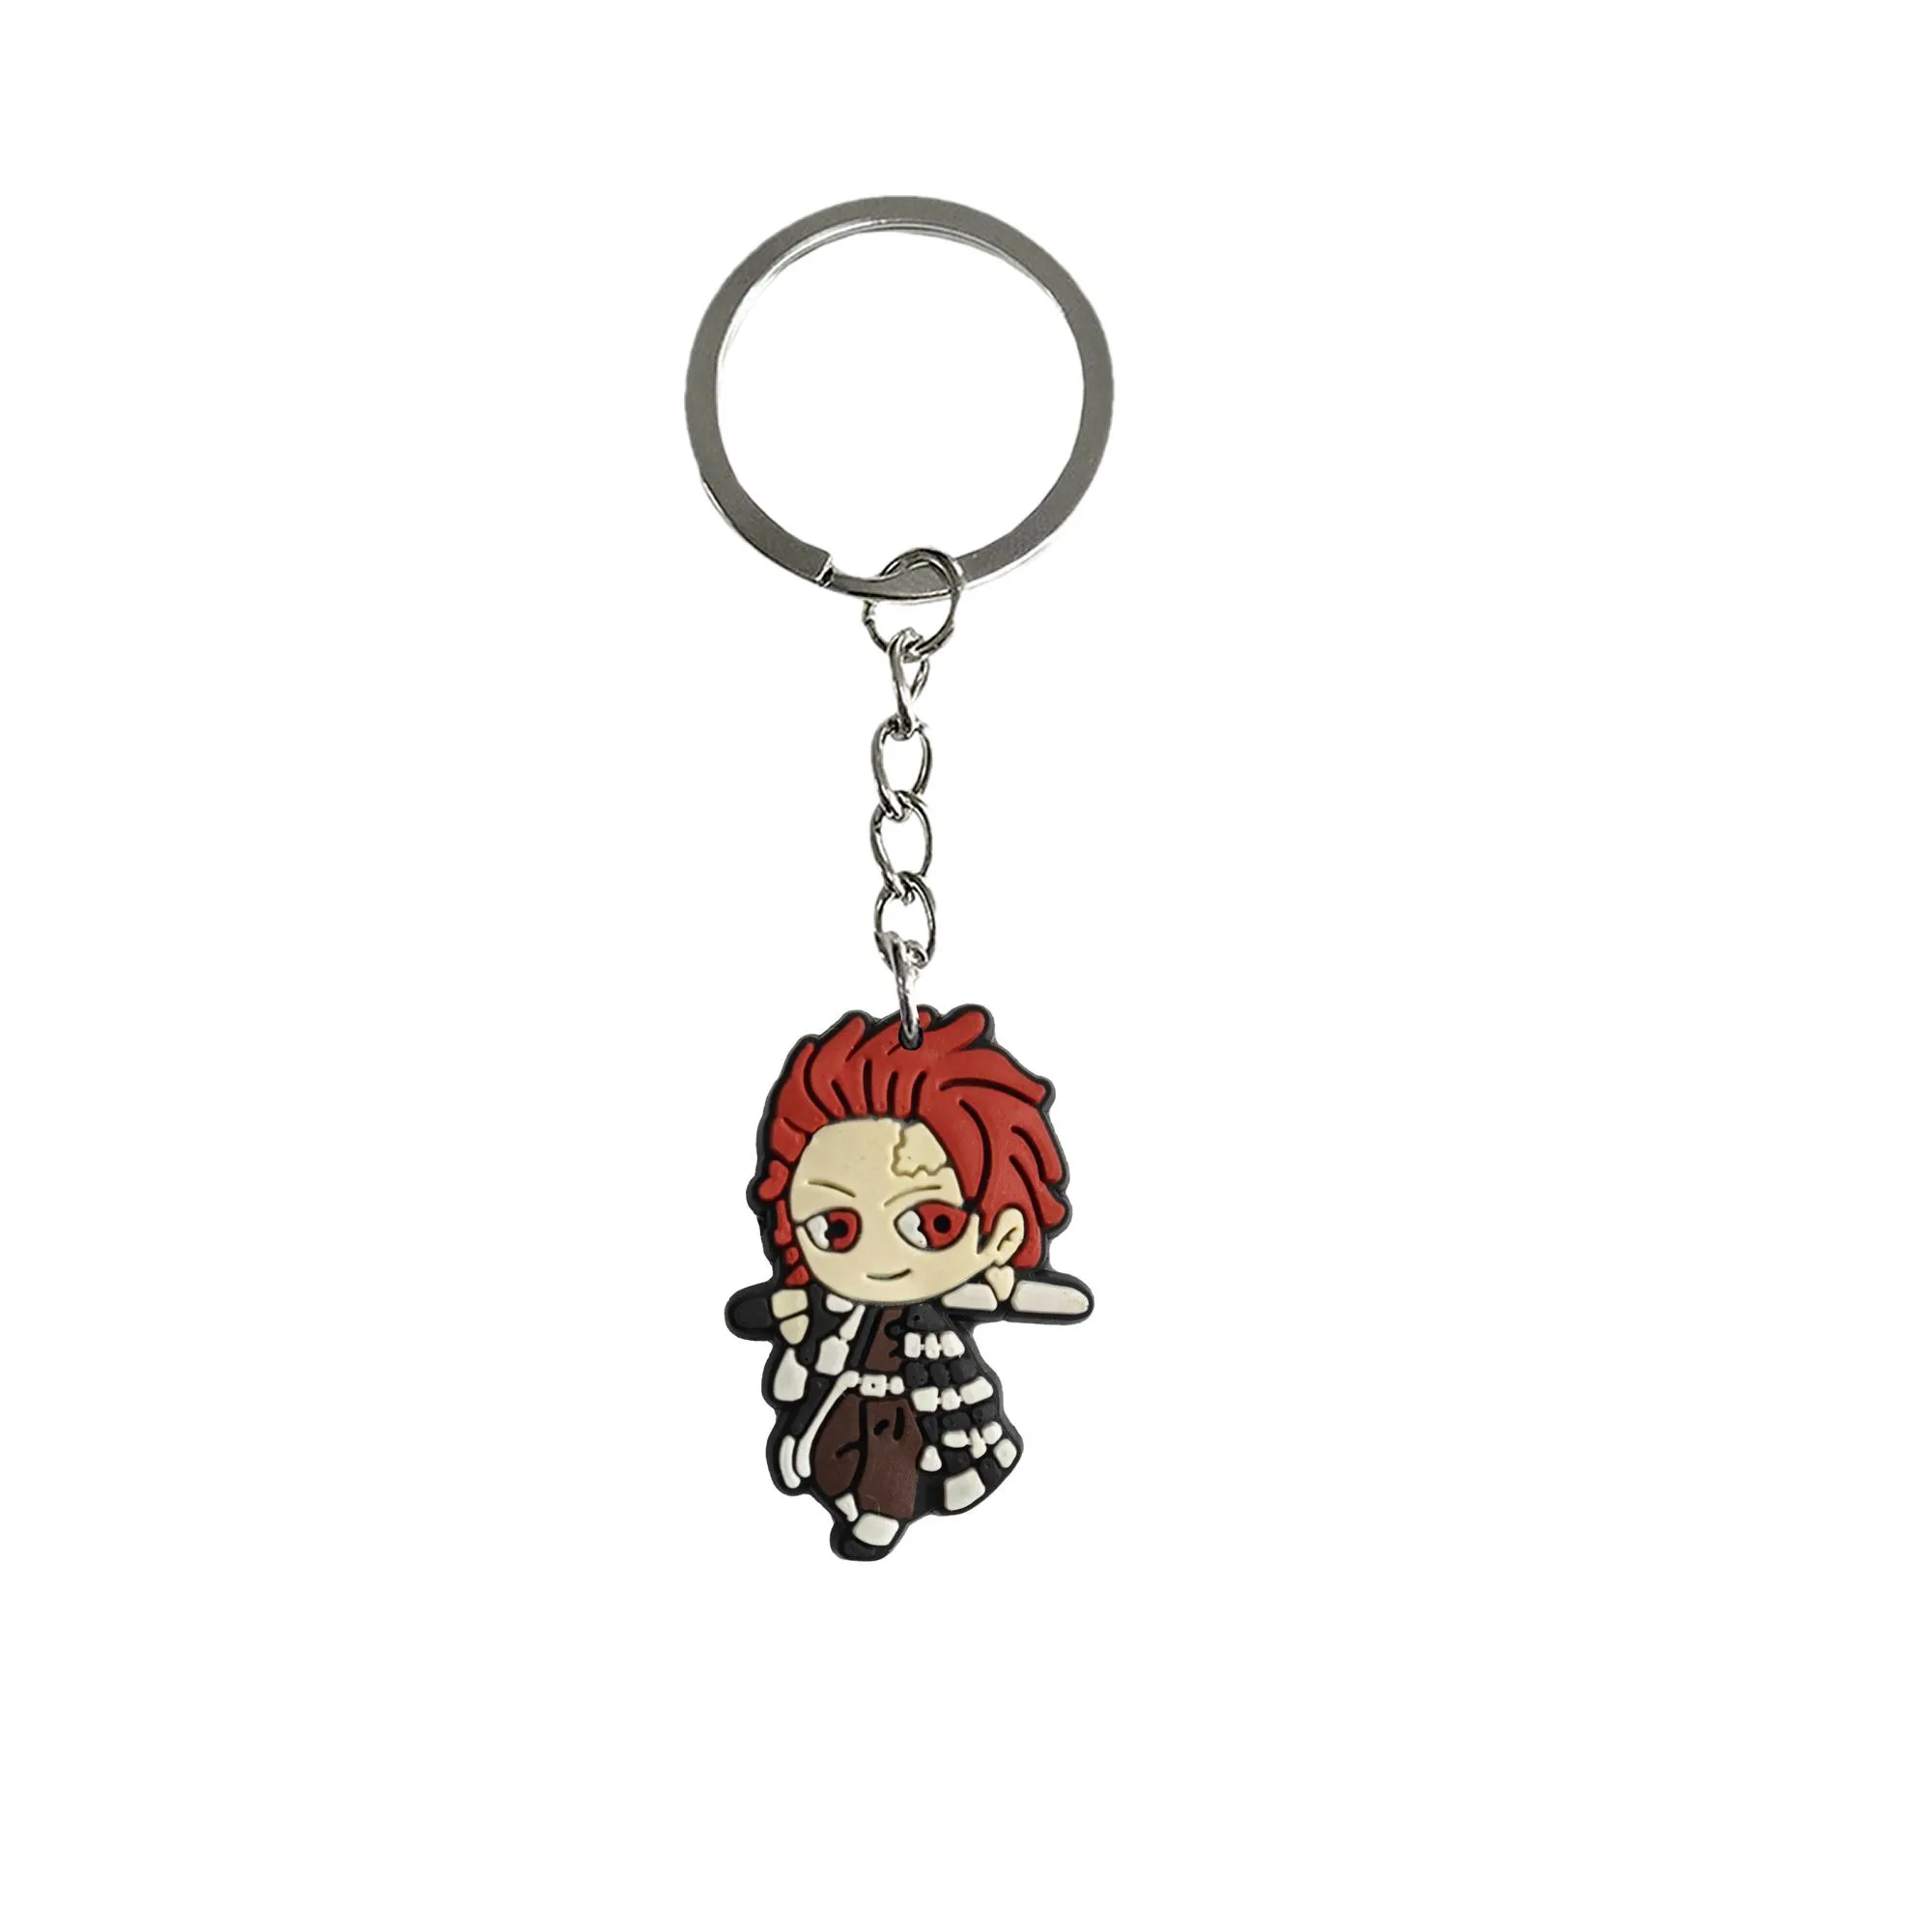 anime characters keychain for classroom prizes kids party favors keychains backpack keyring suitable schoolbag couple key chains women car charms